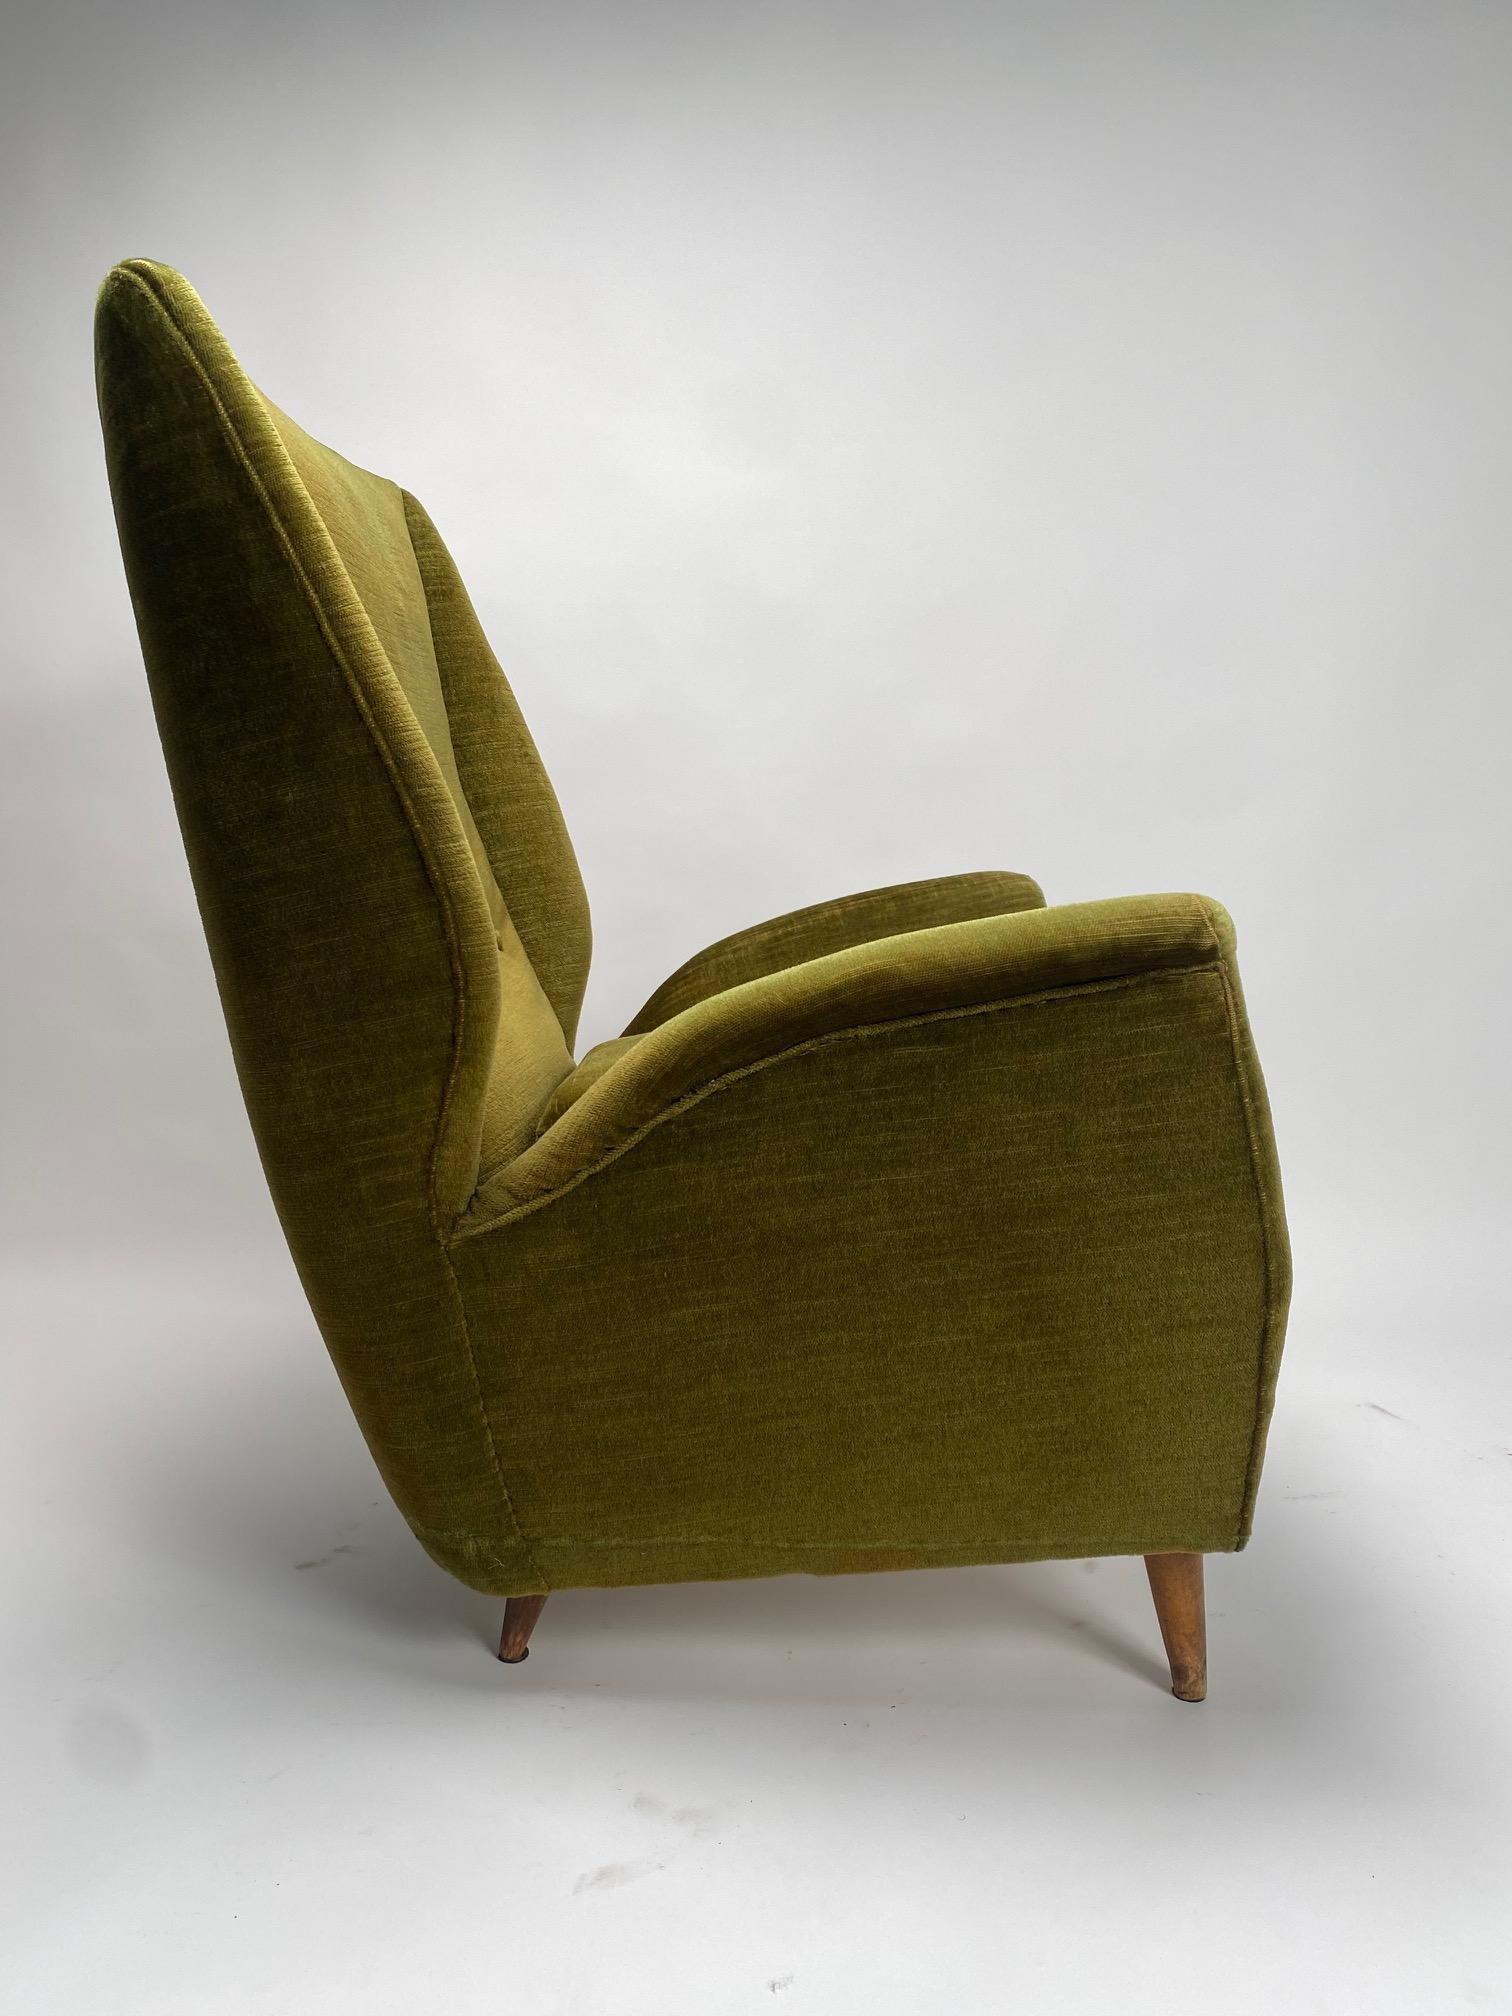 Gio Ponti, Rare pair of Bergere Armchairs for Isa Bergamo, Italy, 1950s

A very rare pair of Gio Ponti armchairs, retaining their original green velvet, ISA Bergamo, Italy, 1950s. The original fabric shows minor signs of use and wear. Fast shipping